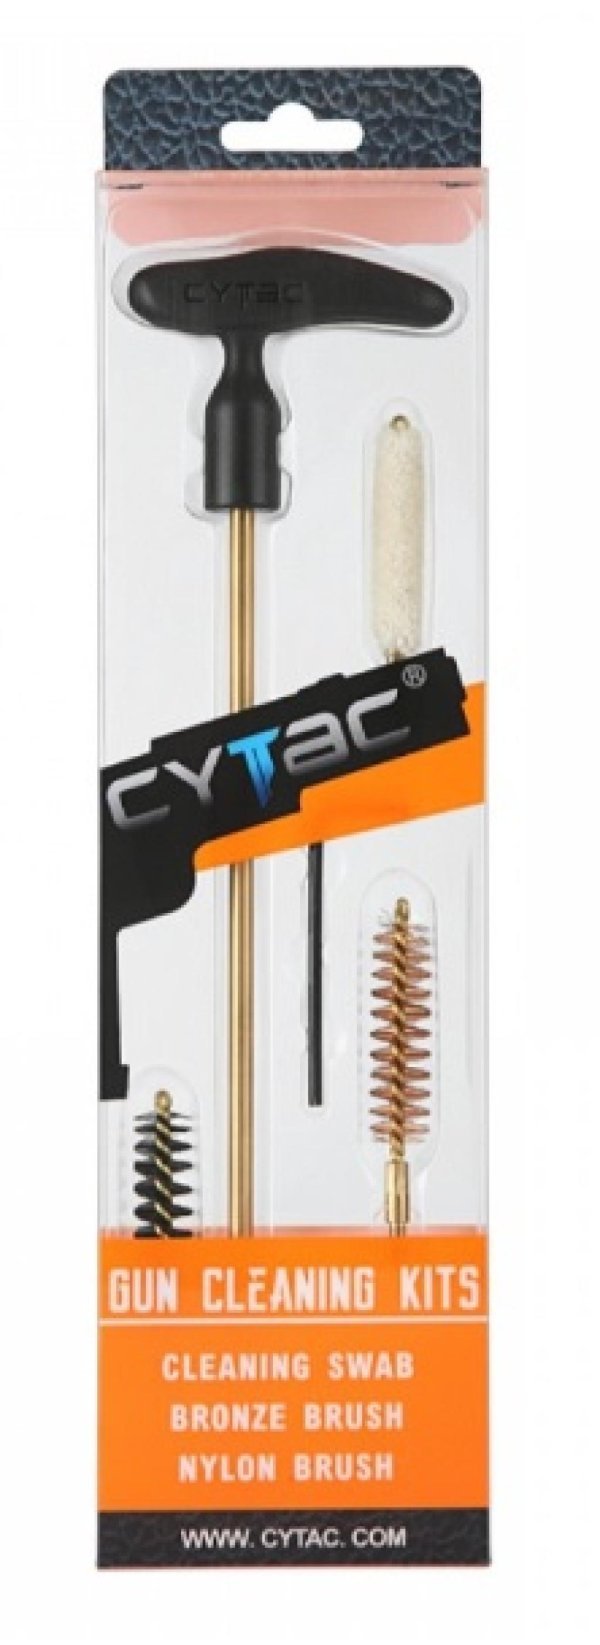 CYTAC CLEANING BRUSHES KIT .38 CAL / 9MM